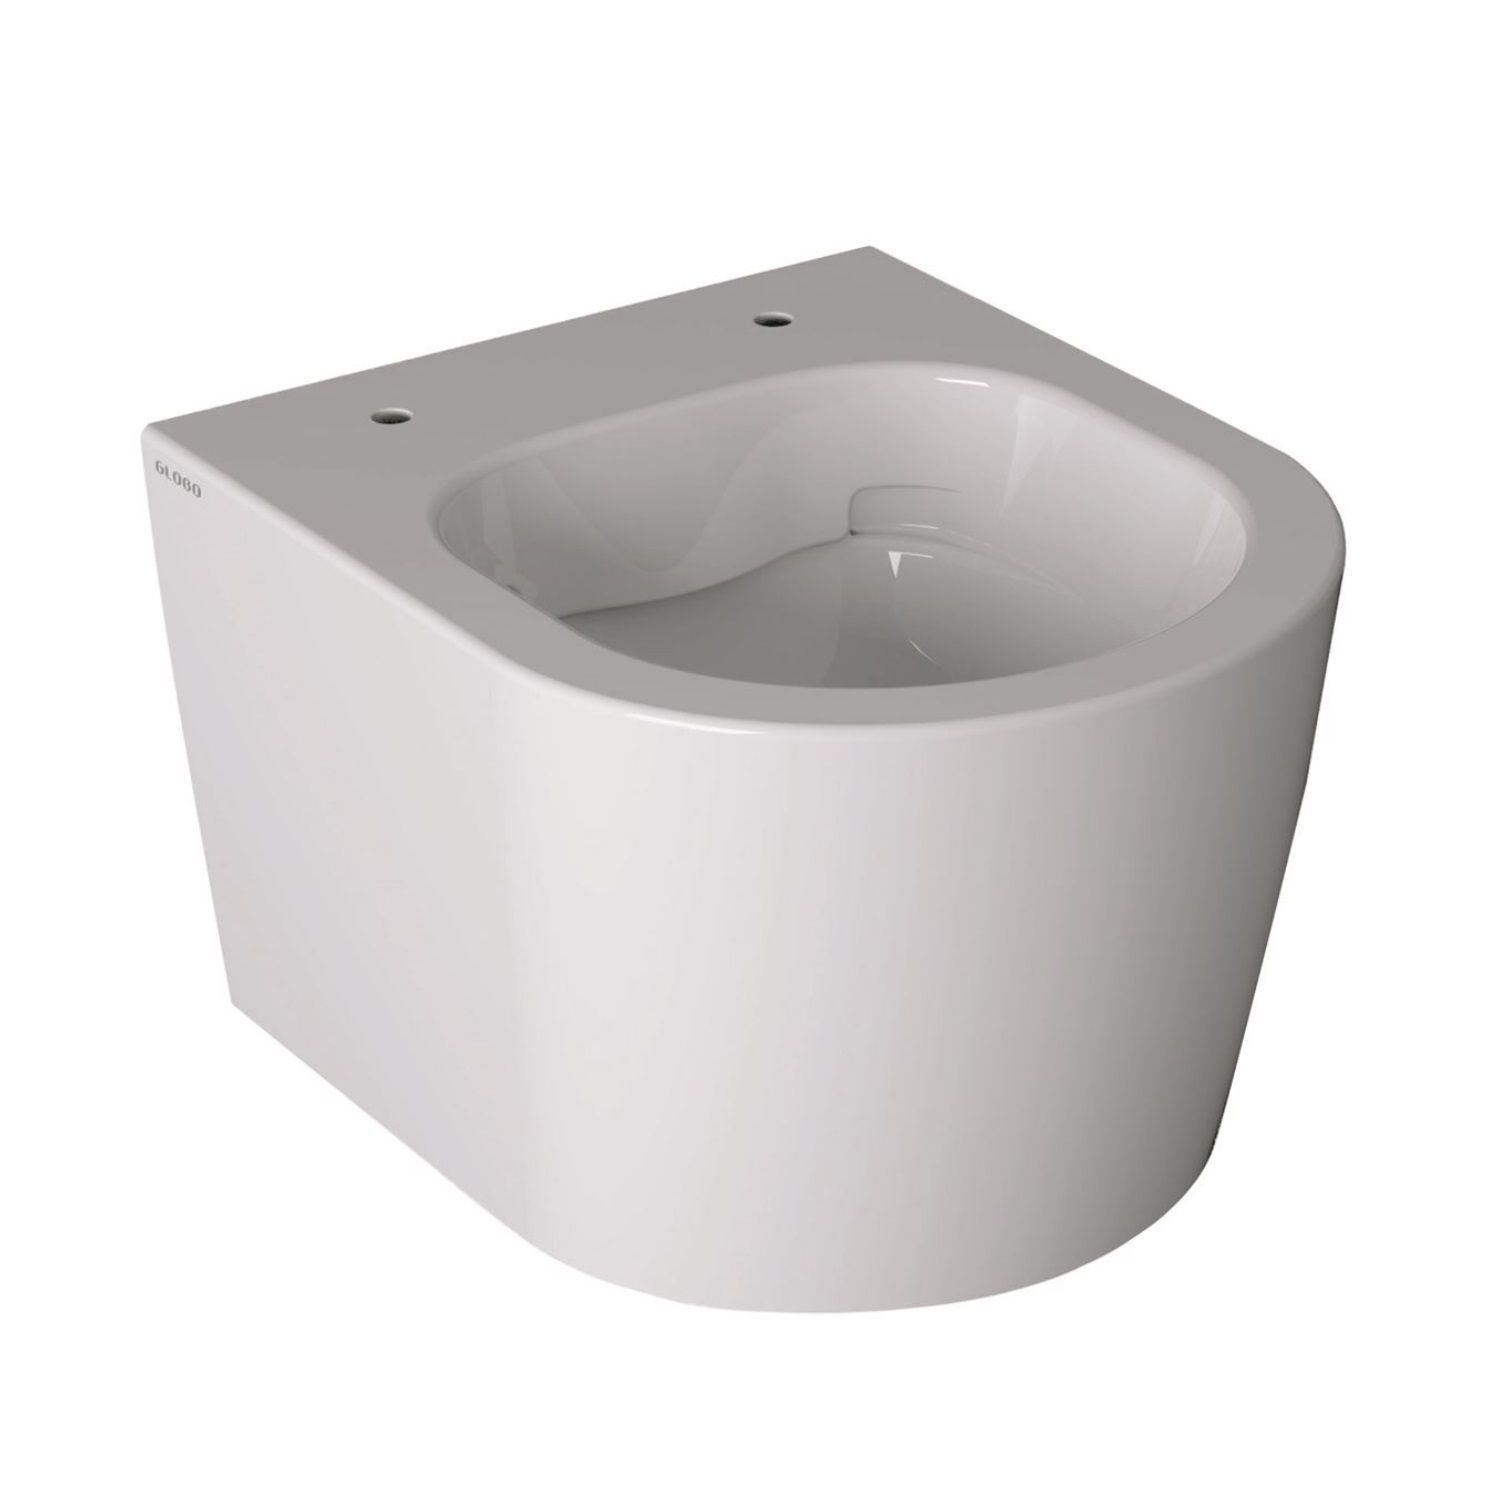 Luca Sanitair Wandcloset Forty 3 43x36 cm Compact Rimless Wit - Wandcloset Exclusief Toiletzitting